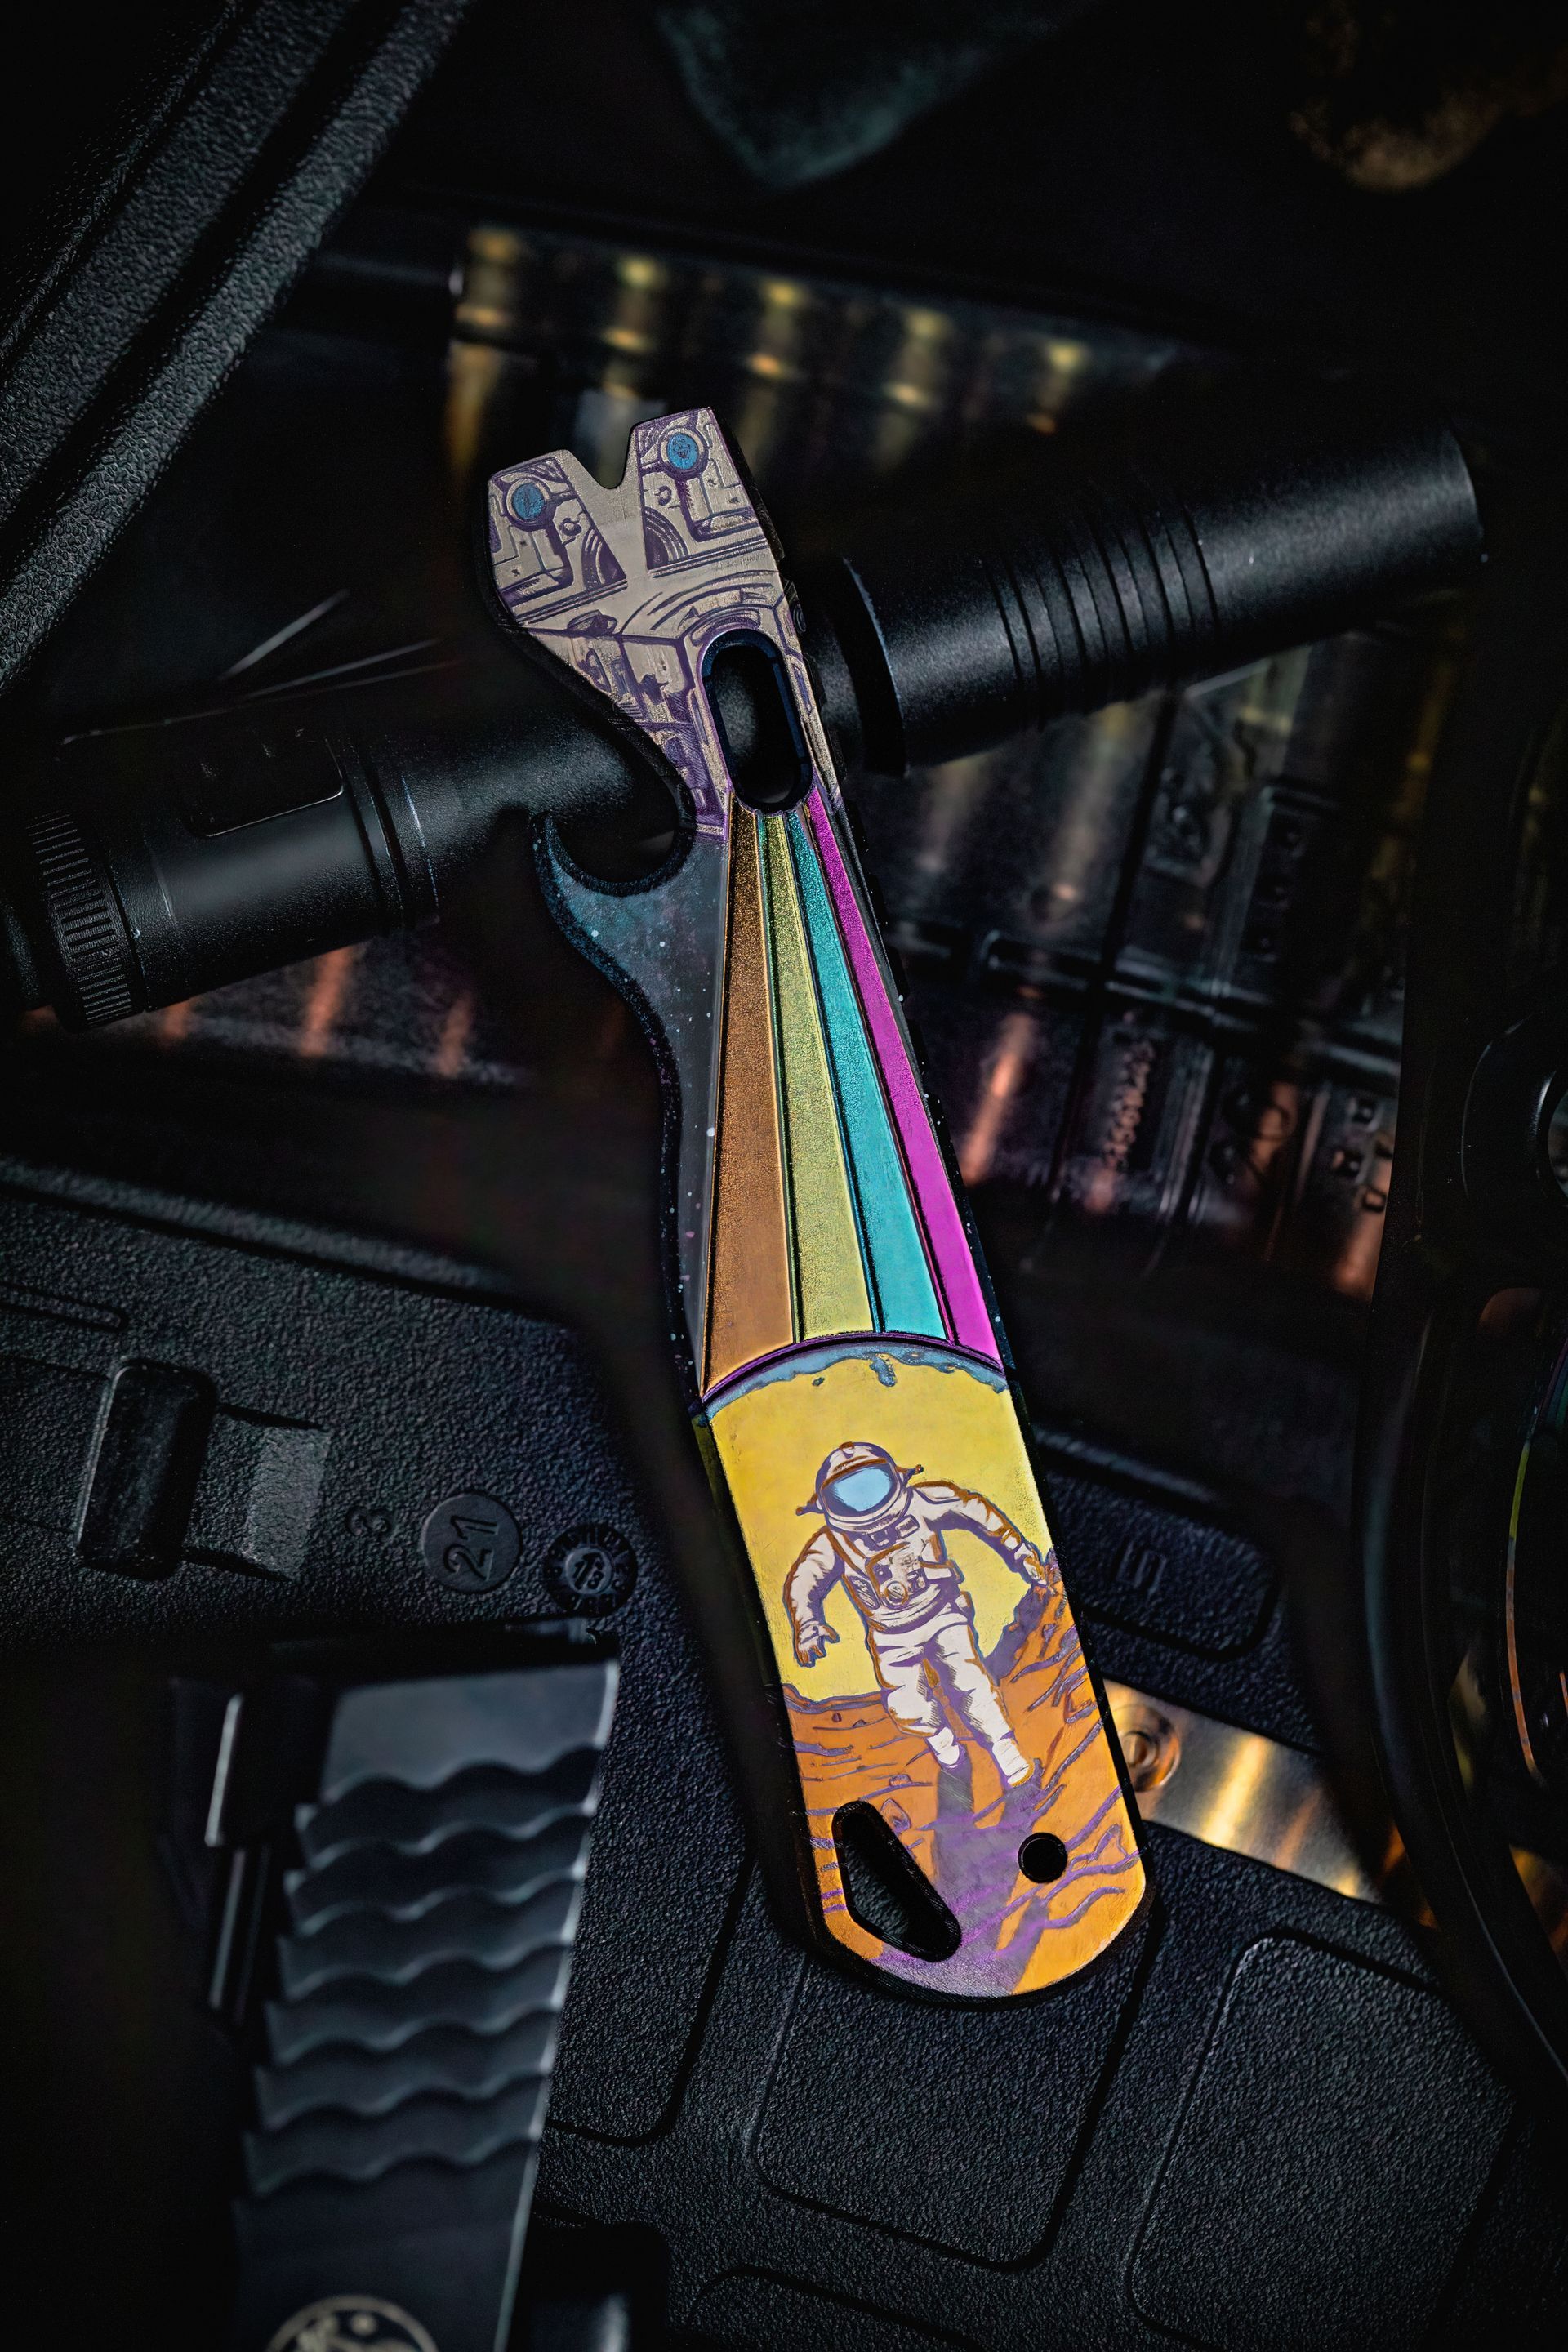 Open and closed composite image of the Northern Knives x Colorful Filth Benchmade Bugout